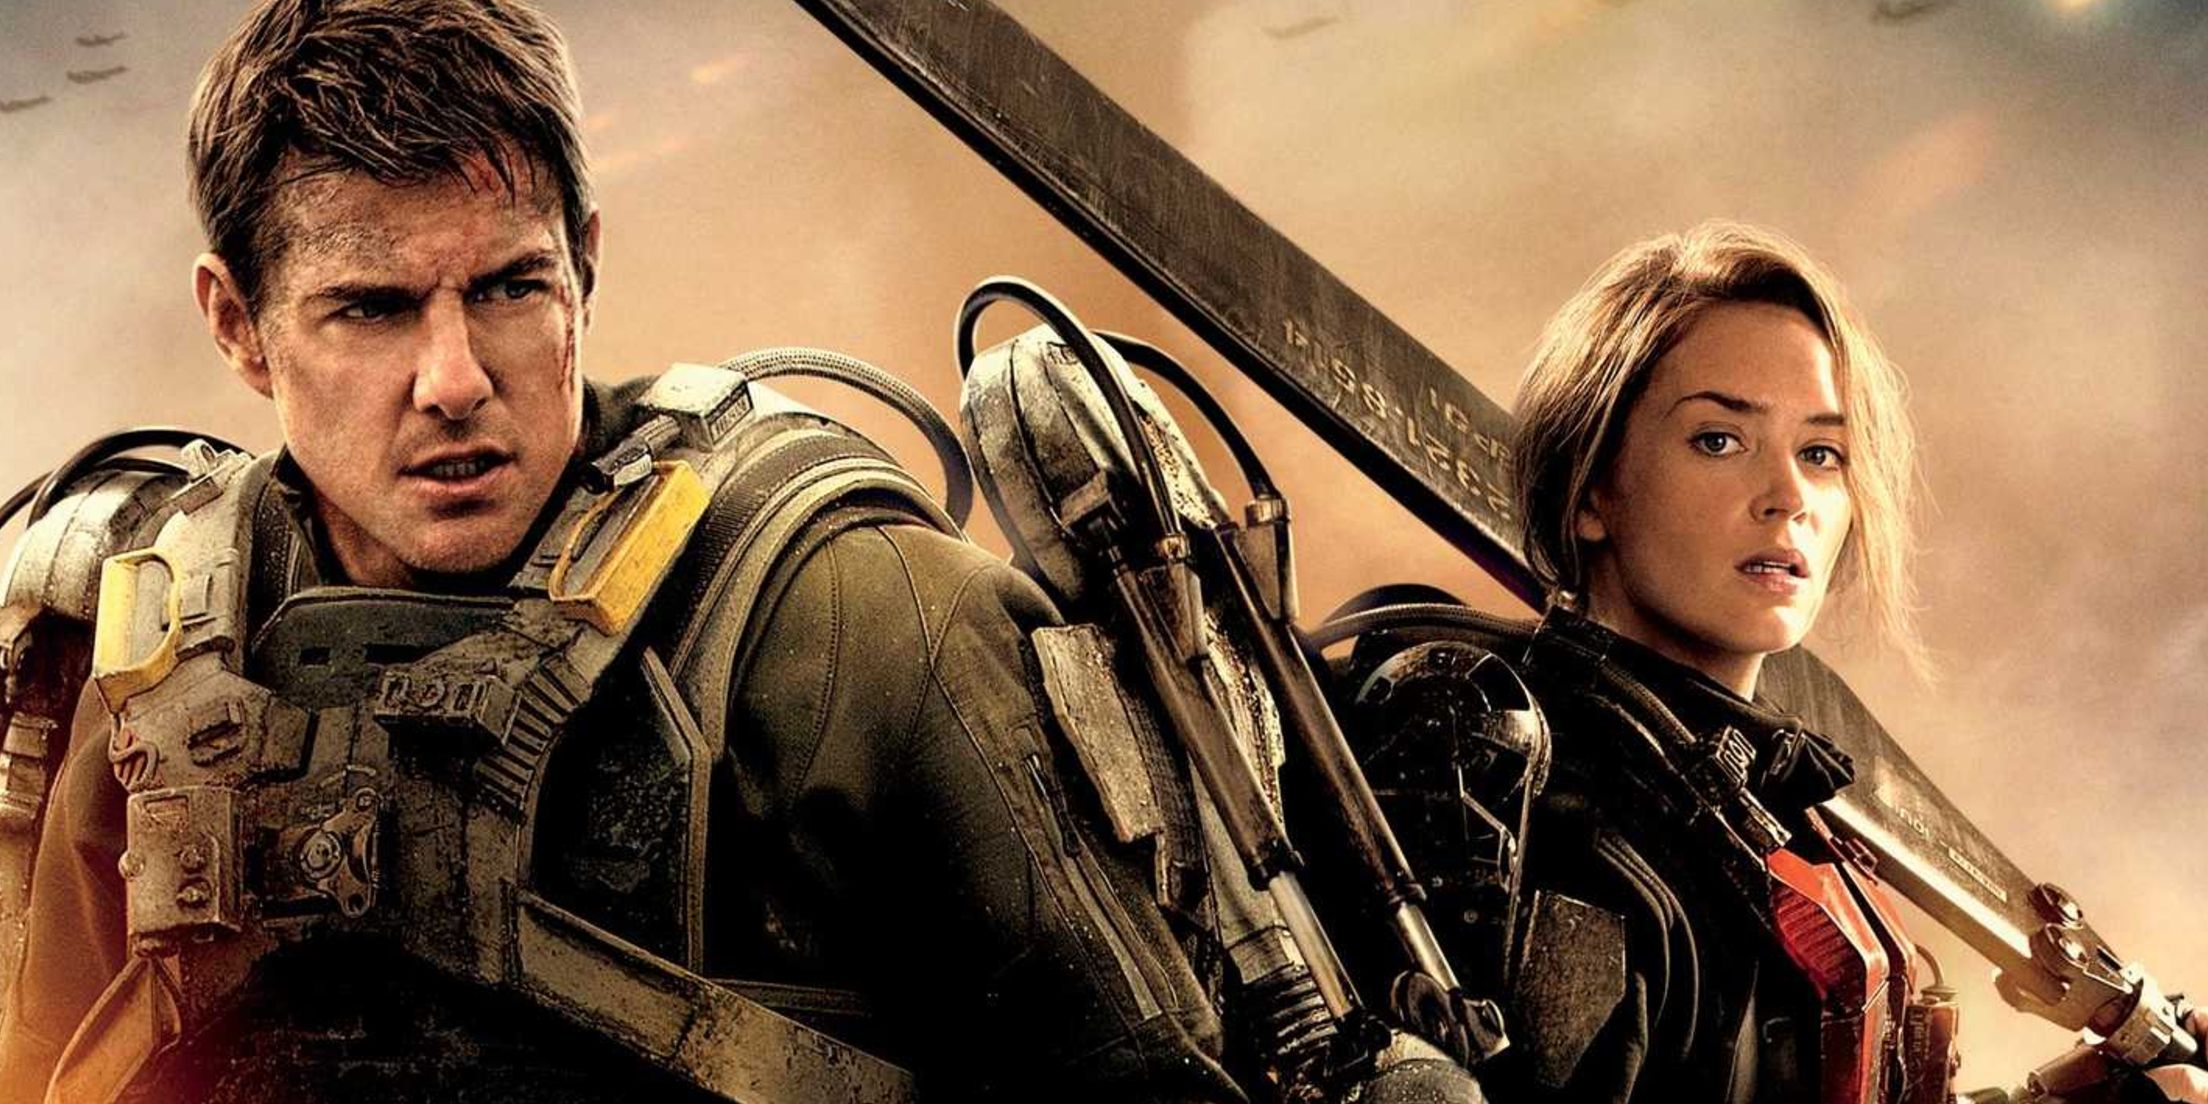 Edge Of Tomorrow 2 Will Be Smaller, More Character-Driven